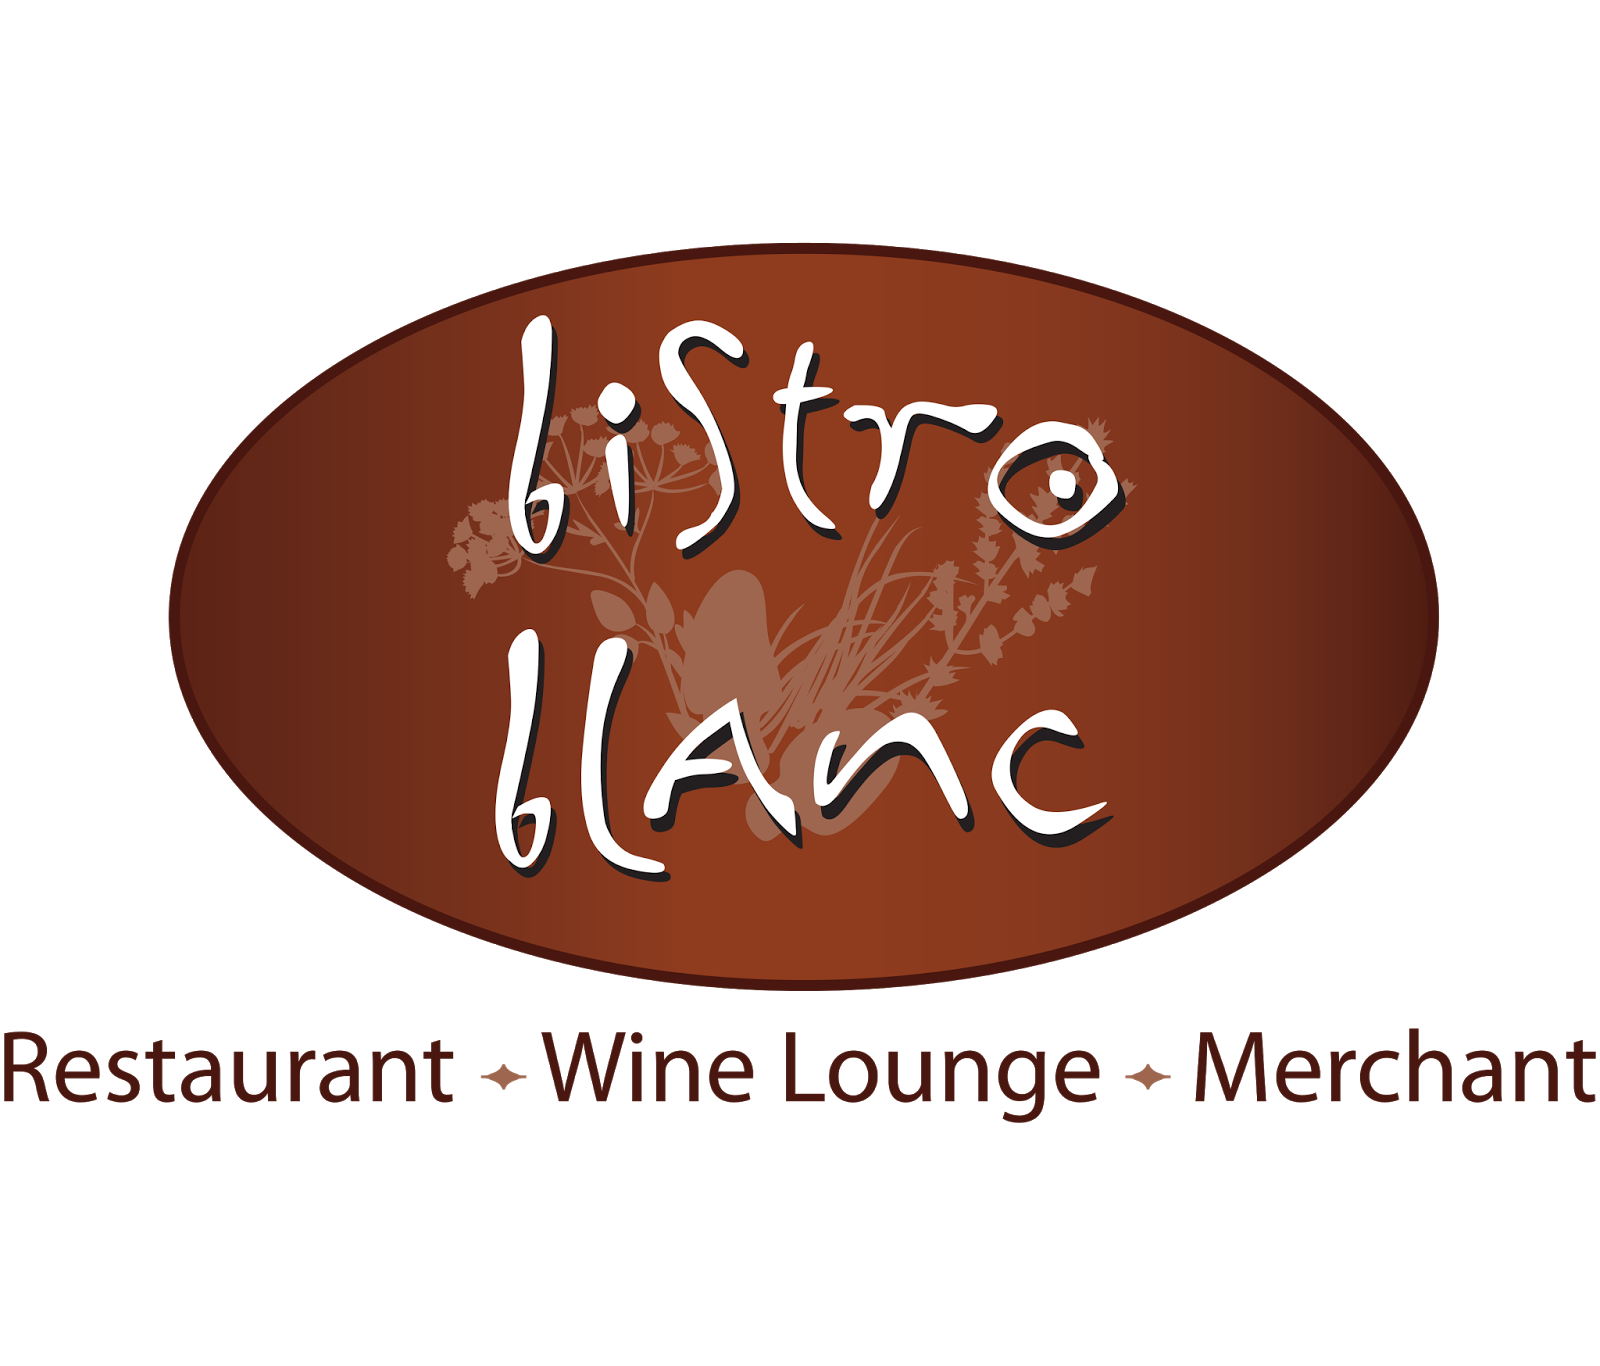 Some People Say: Bistro Blanc Offers Spirit and Fun in Glenelg Area